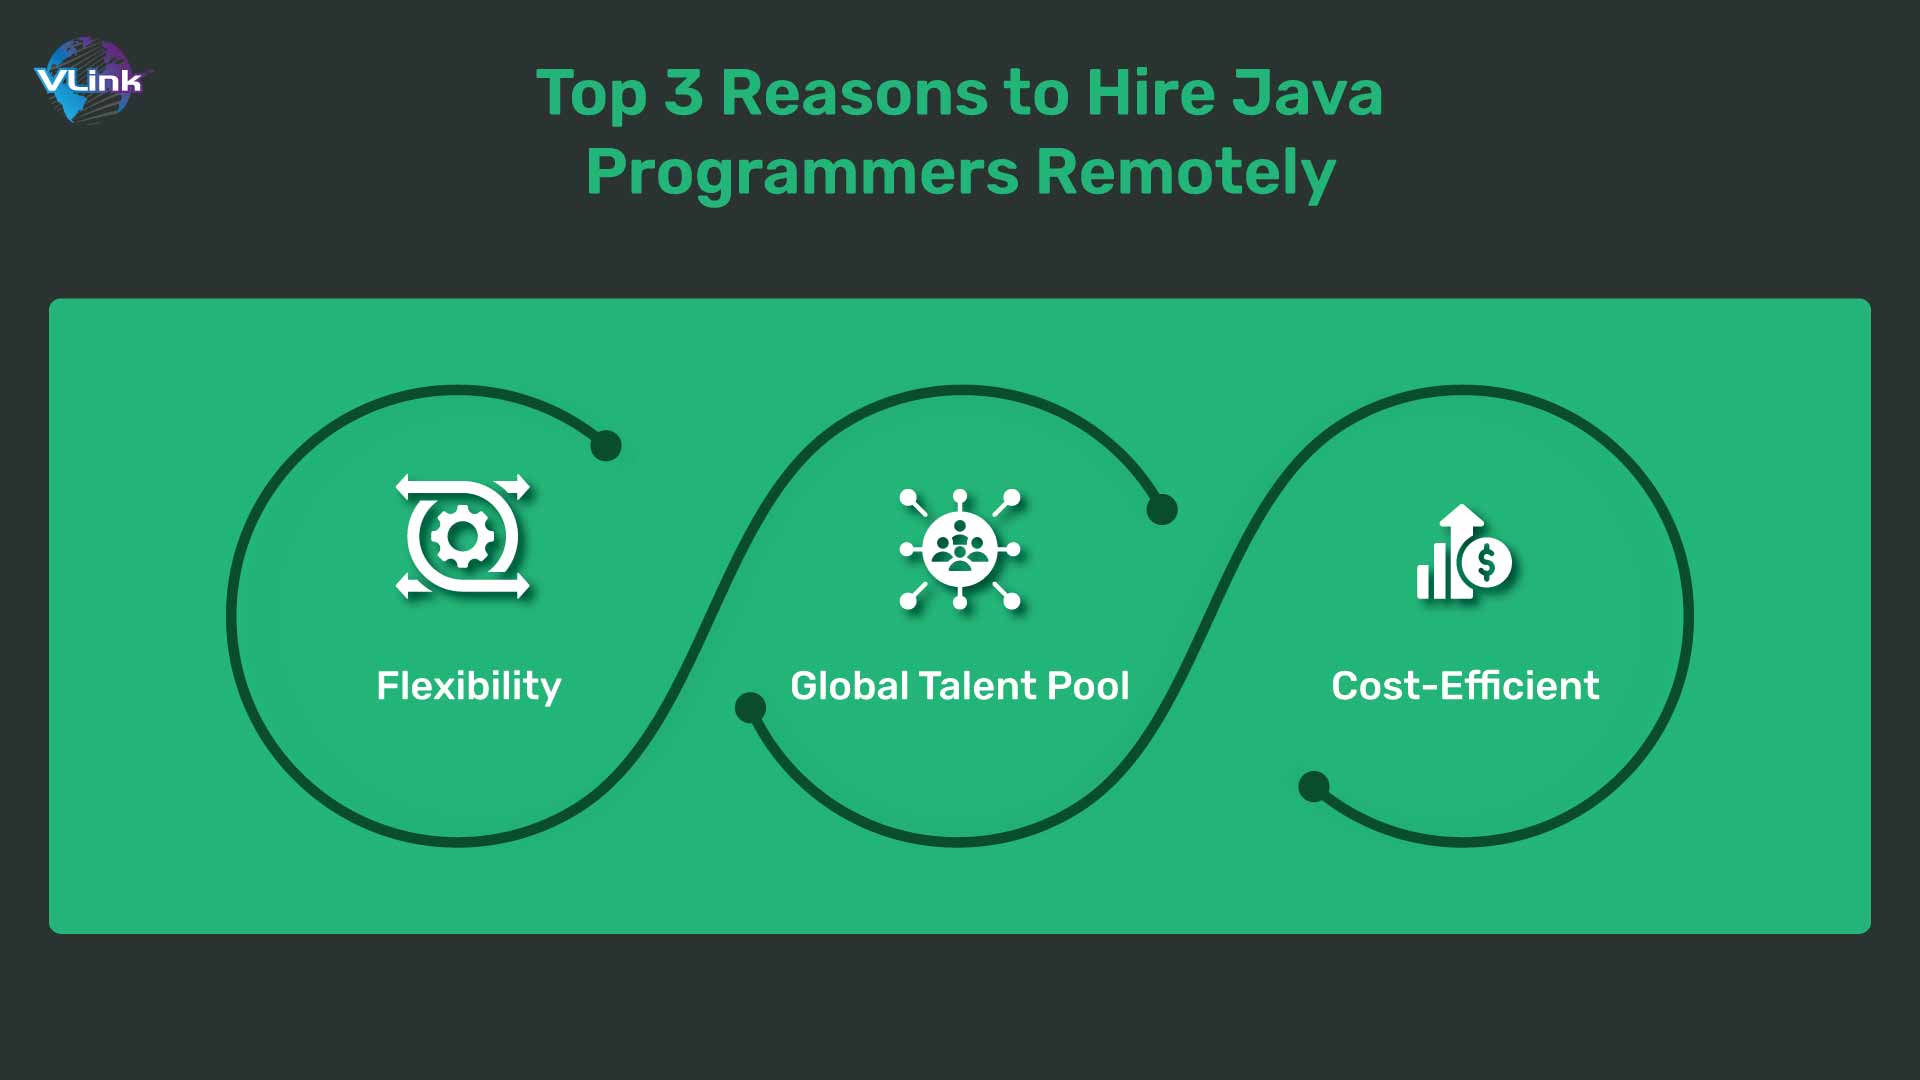 Top 3 Reasons to Hire Java Programmers Remotely